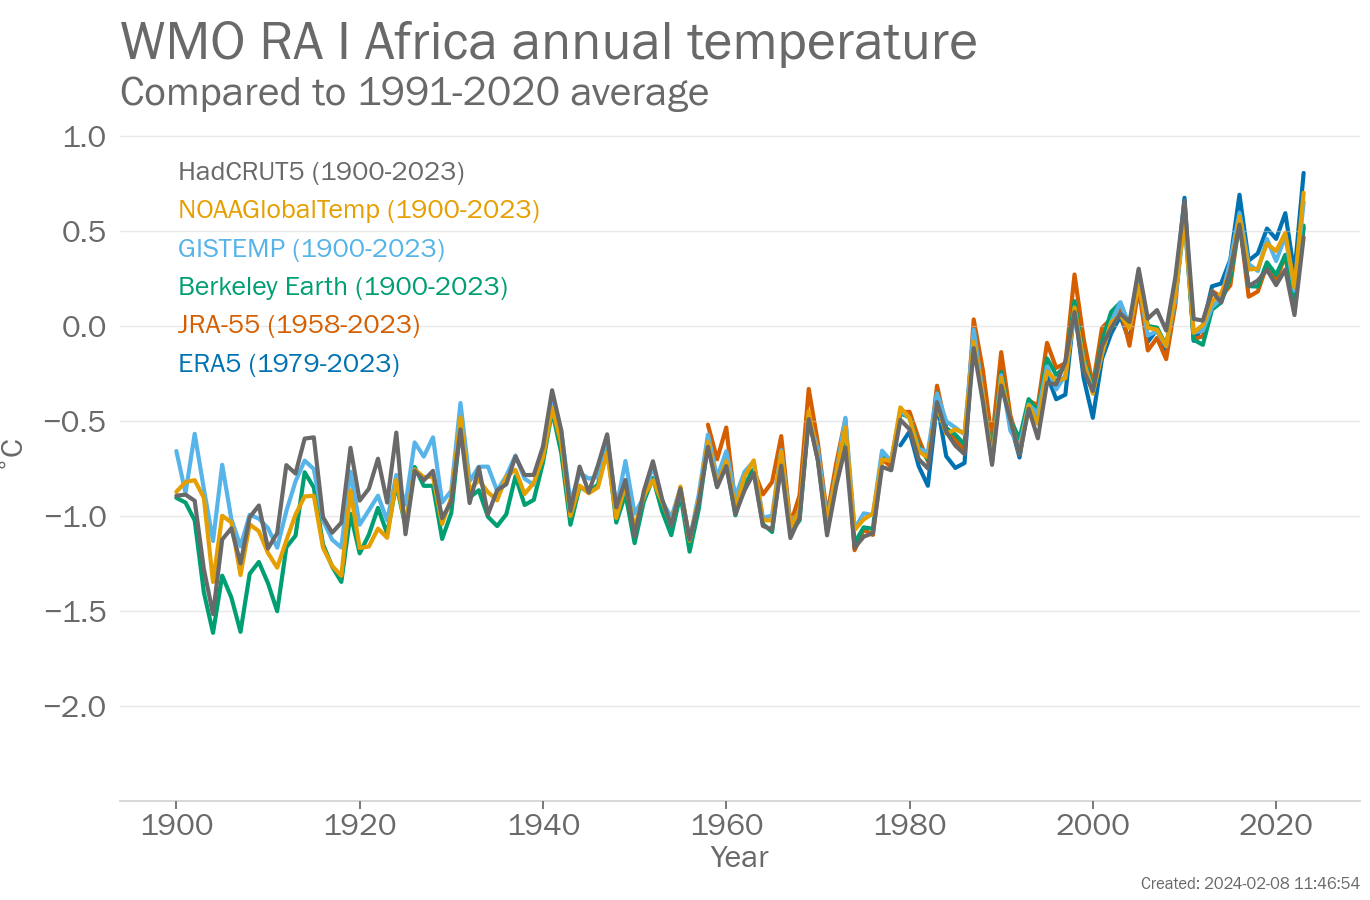 Annual Regional mean temperature for WMO RA 1 Africa (°C, difference from the 1991-2020 average)  from 1900-2023. Data are from the following six data sets: Berkeley Earth, ERA5, GISTEMP, HadCRUT5, JRA-55, NOAAGlobalTemp.